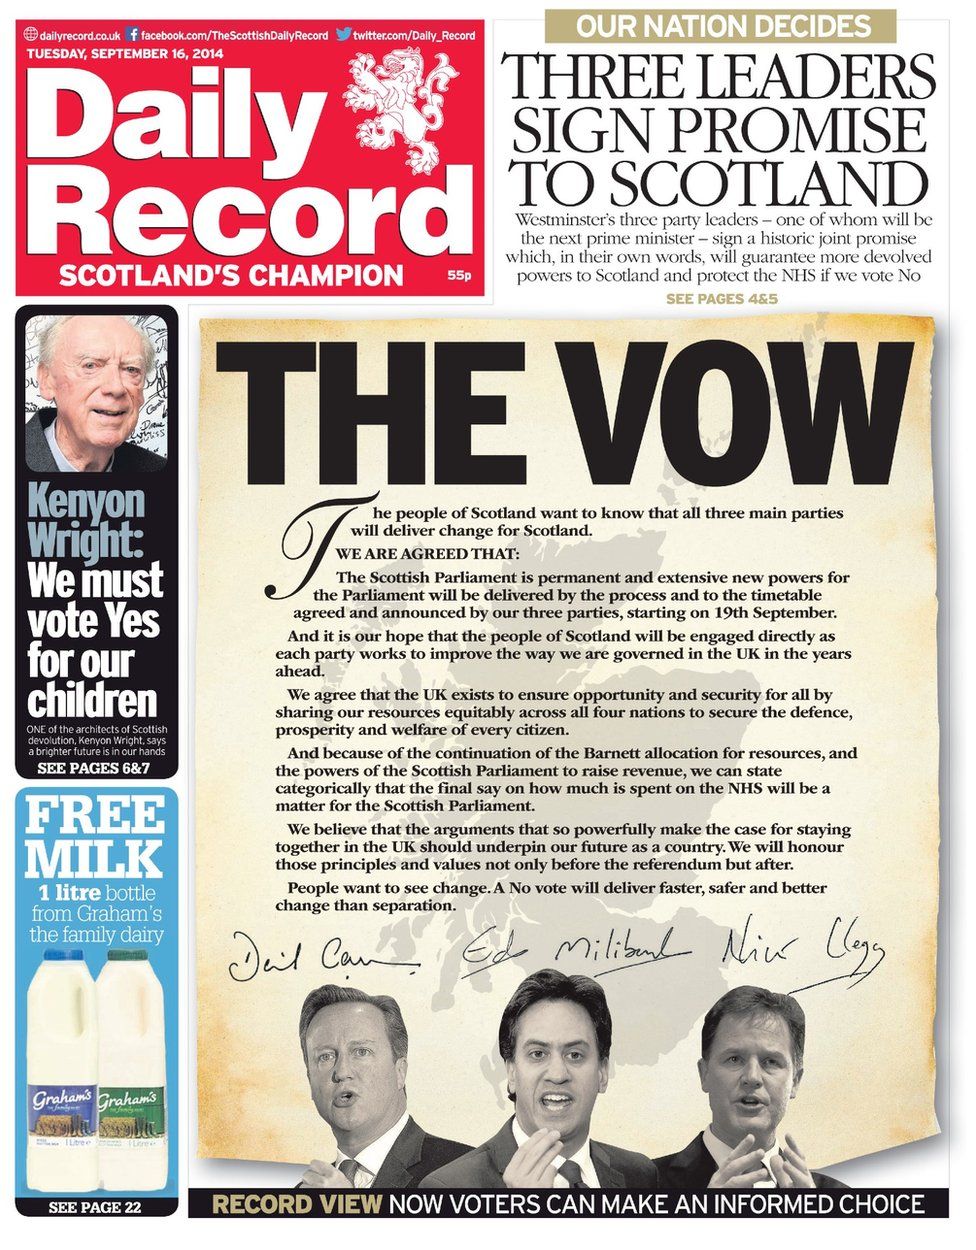 The Vow front page of the Daily Record